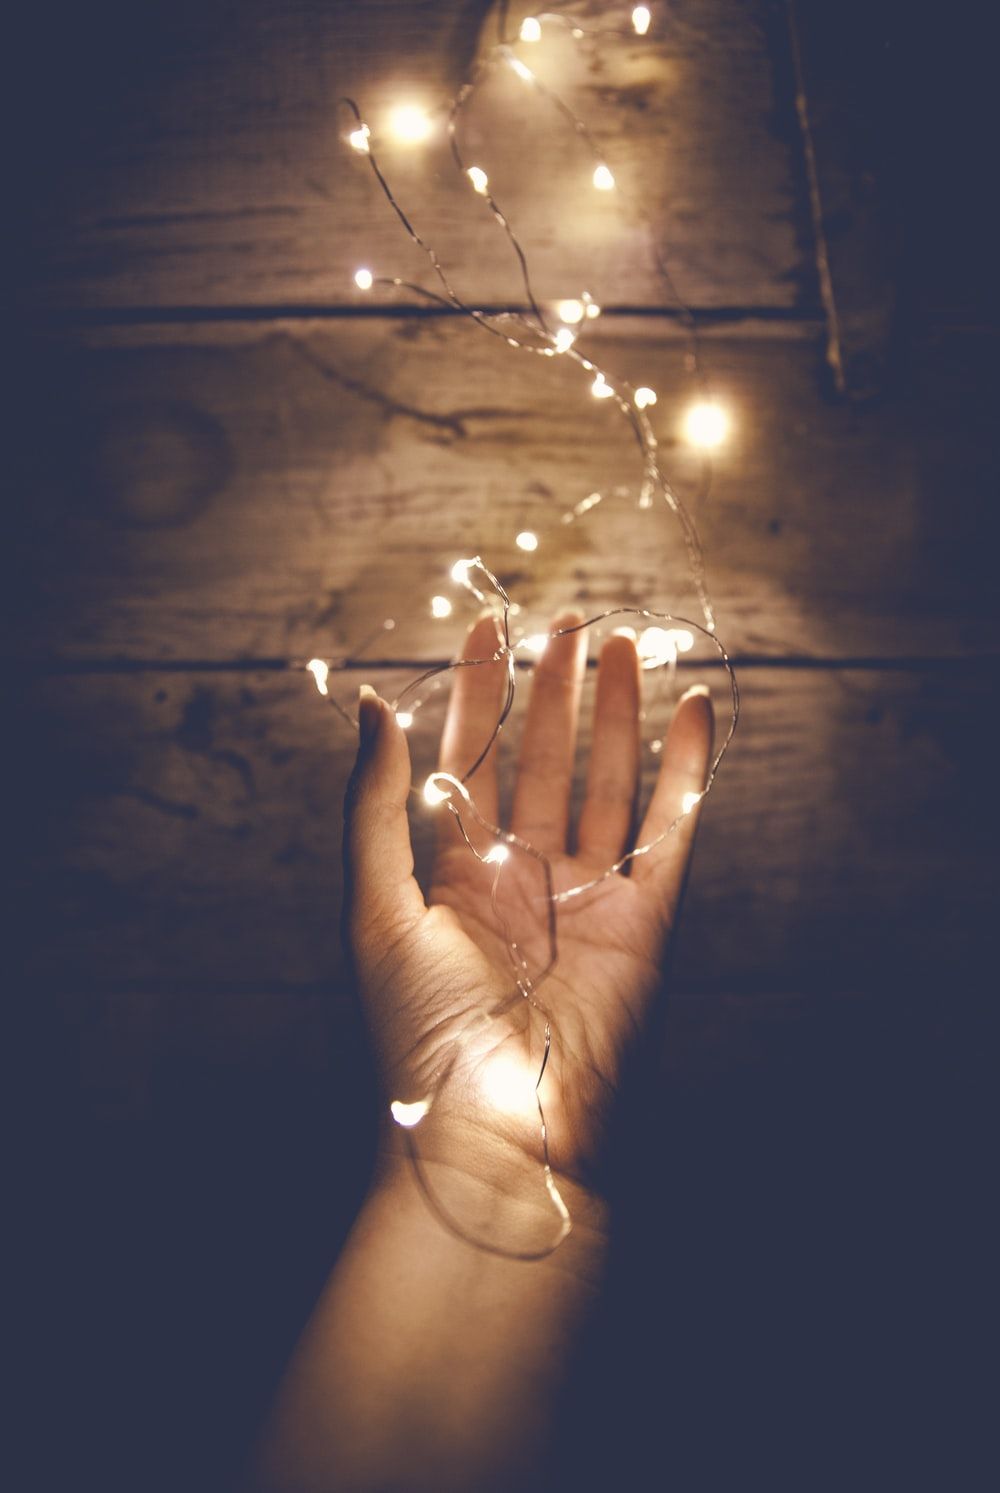 Fairy Light Picture. Download Free Image